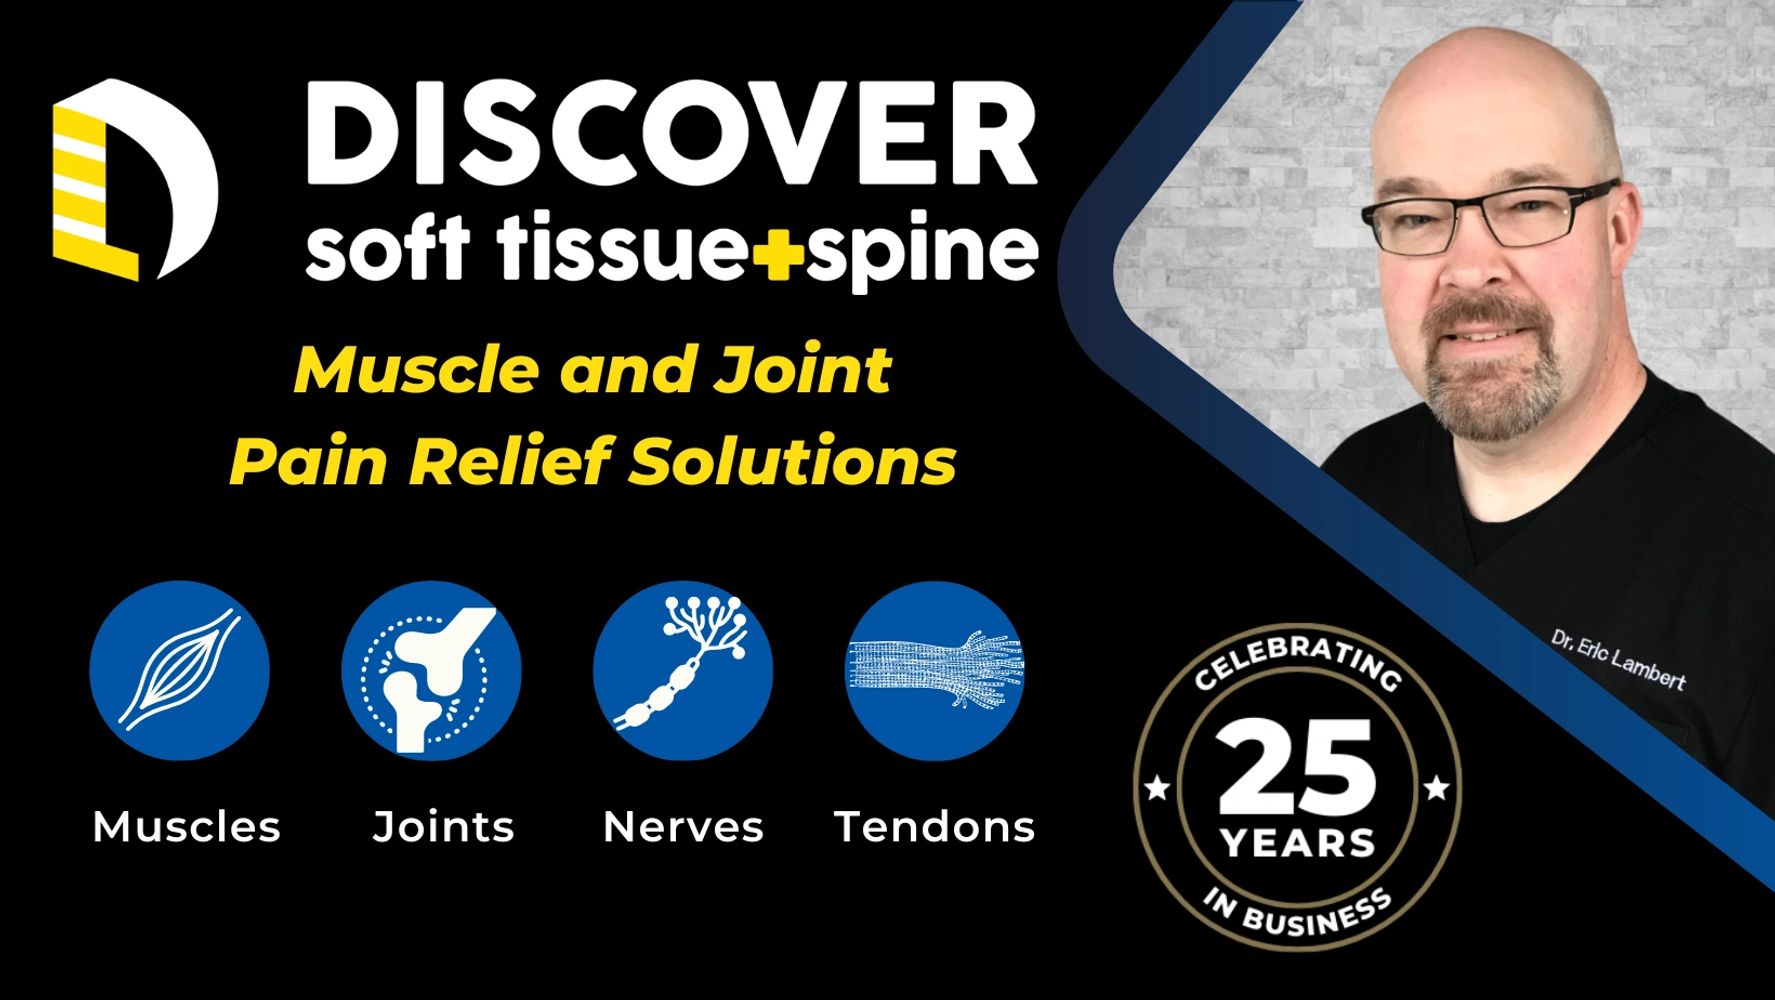 Discover Soft Tissue and Spine - Muscle and Joint Pain Relief Solutions website cover picture